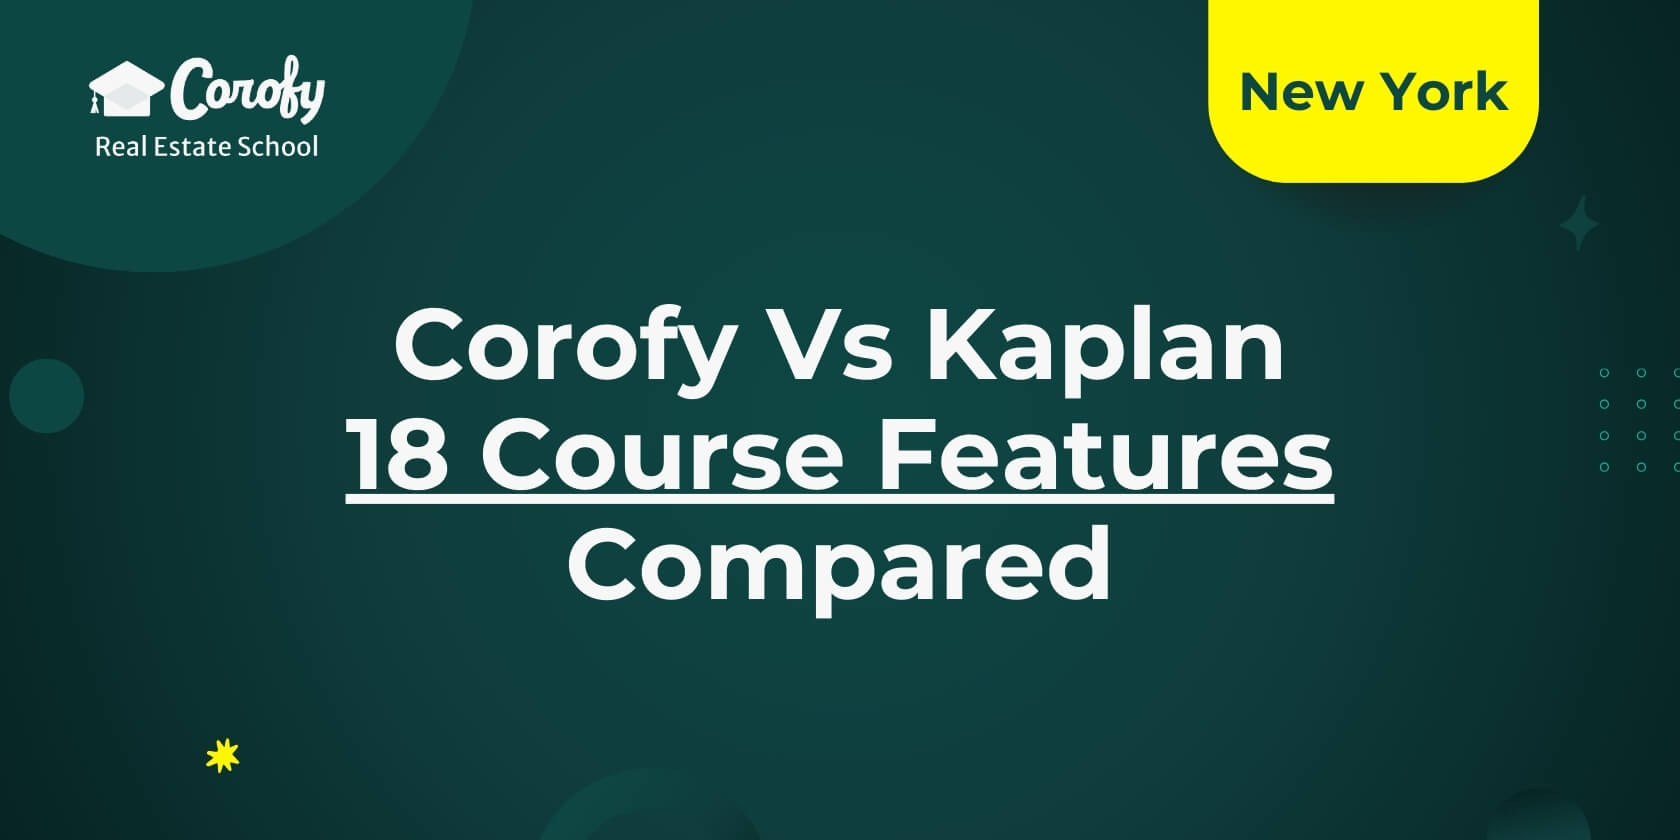 Corofy vs Kaplan - 18 Course Features Compared